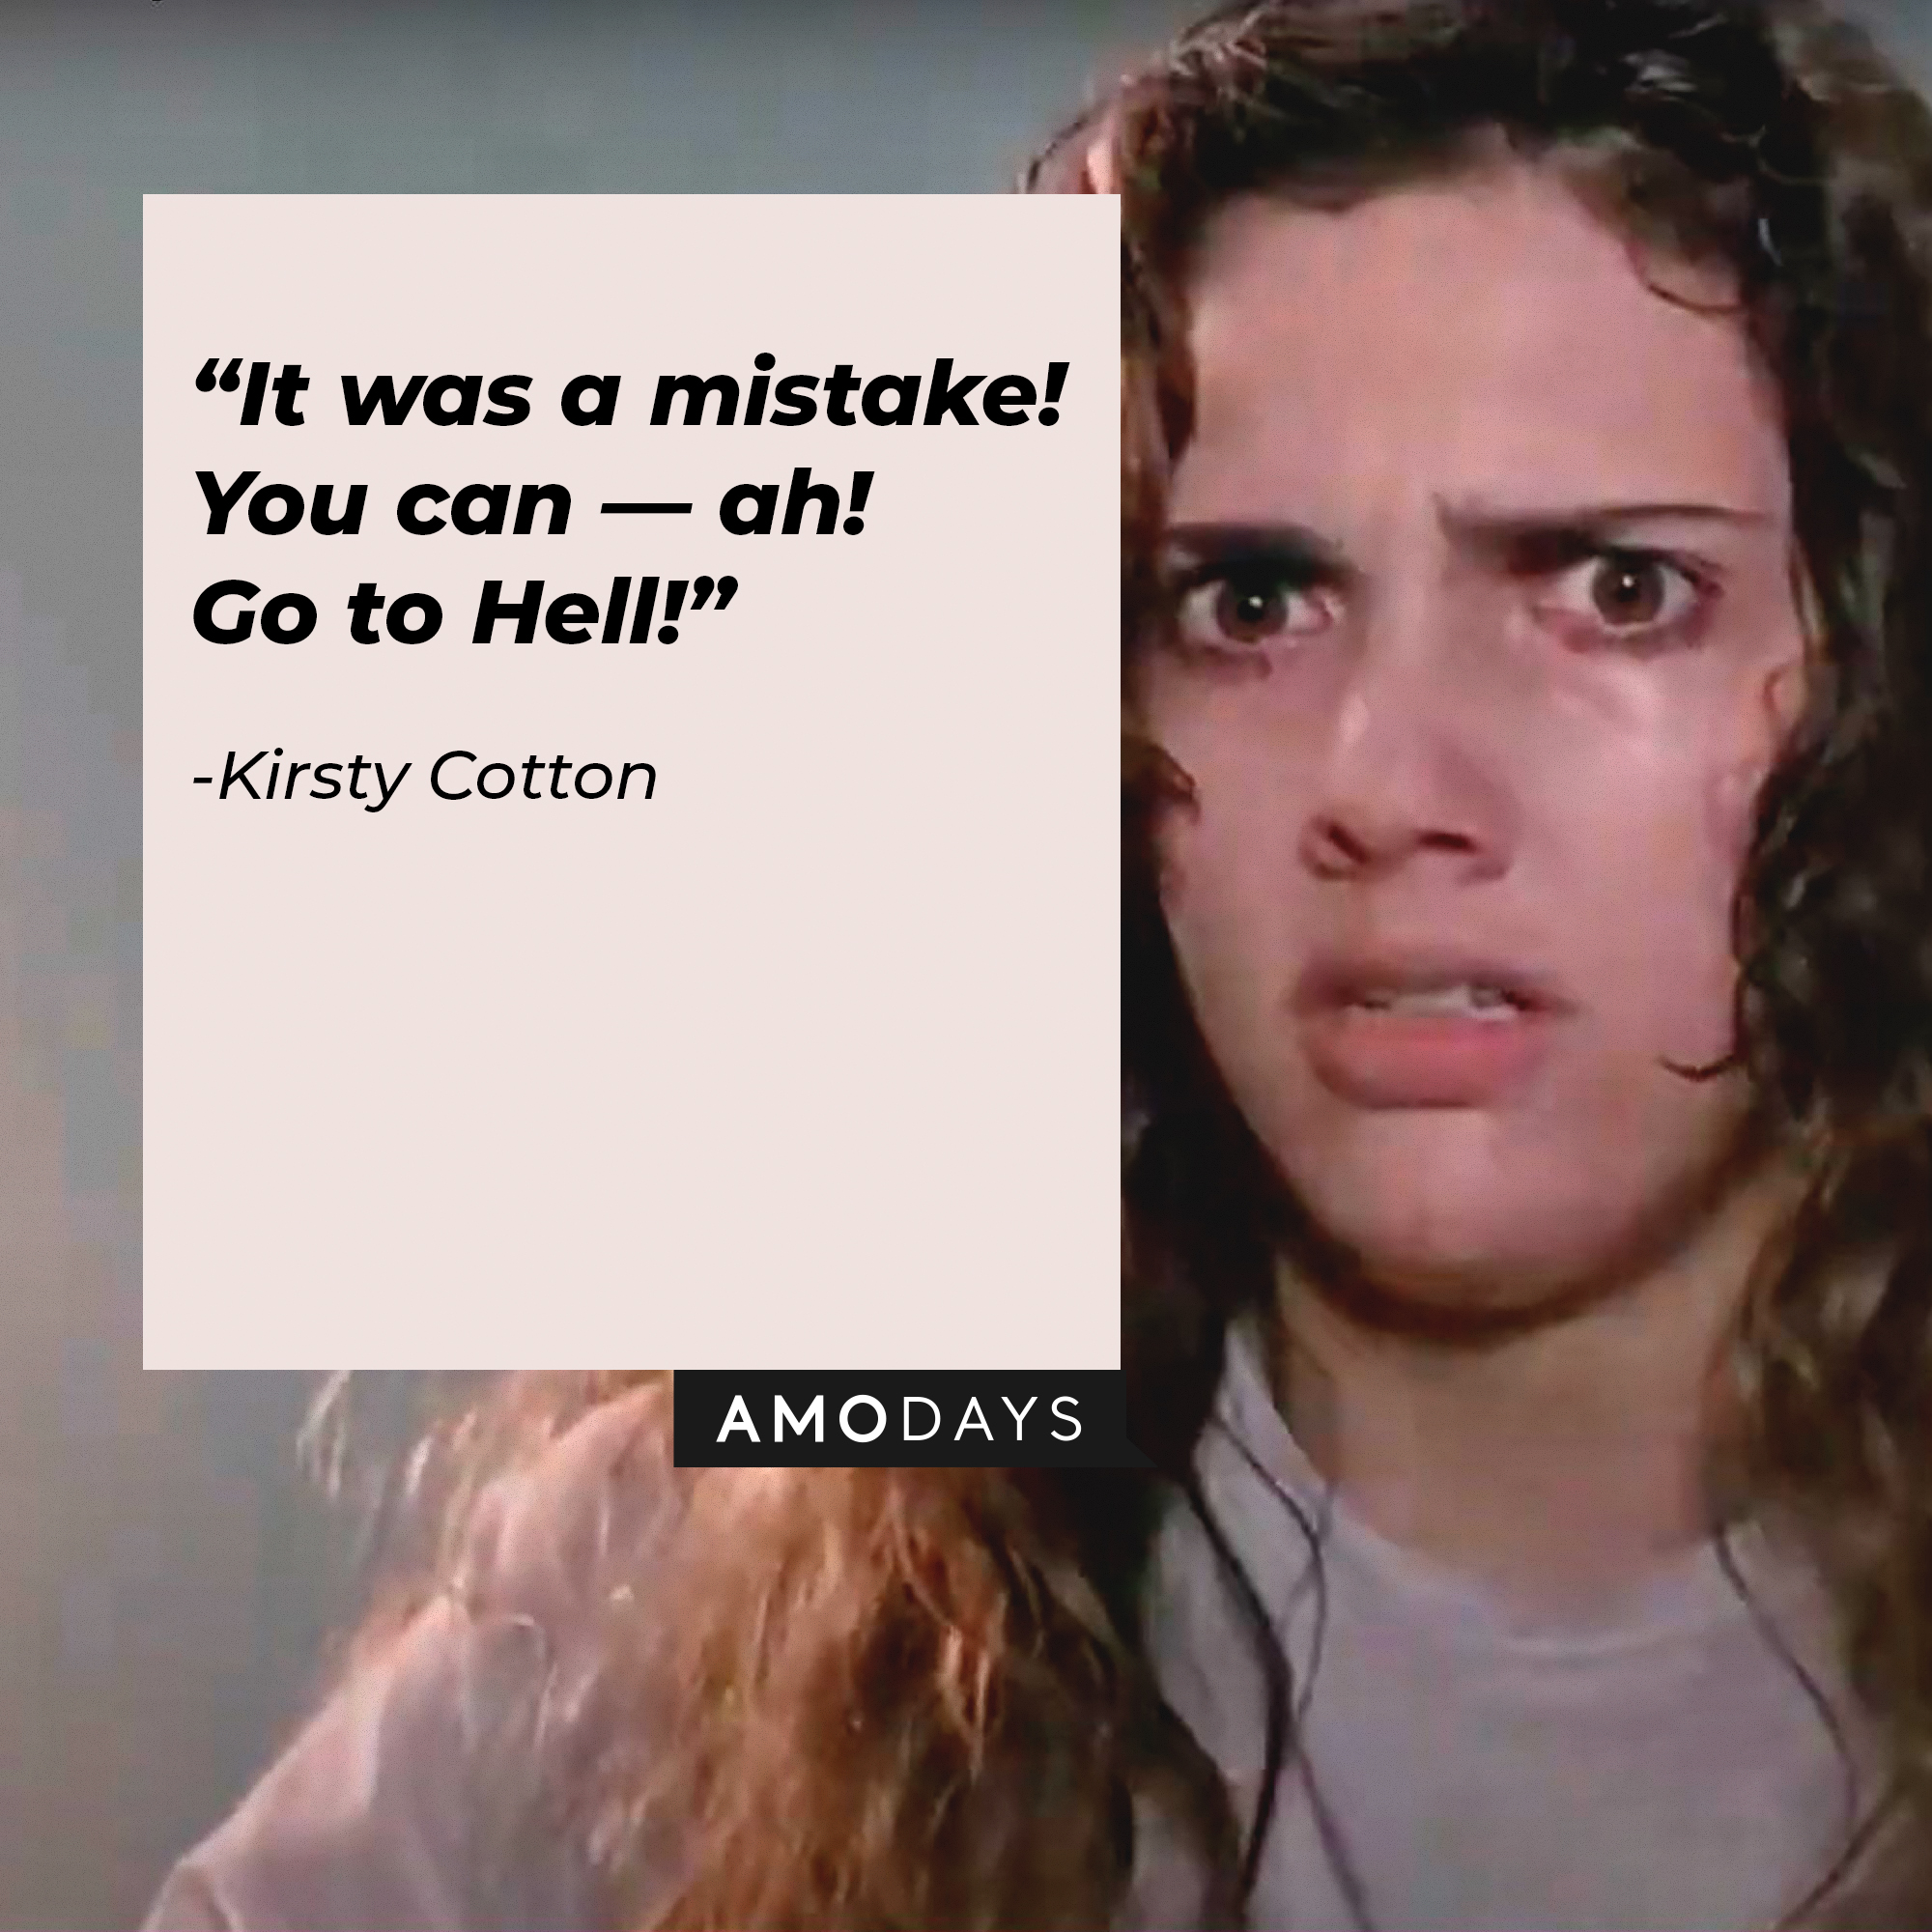 A picture of Kirsty Cotton from “Hellraiser” with a quote by her which reads, “It was a mistake! You can—ah! Go to Hell!” | Image: facebook.com/HellraiserMovies